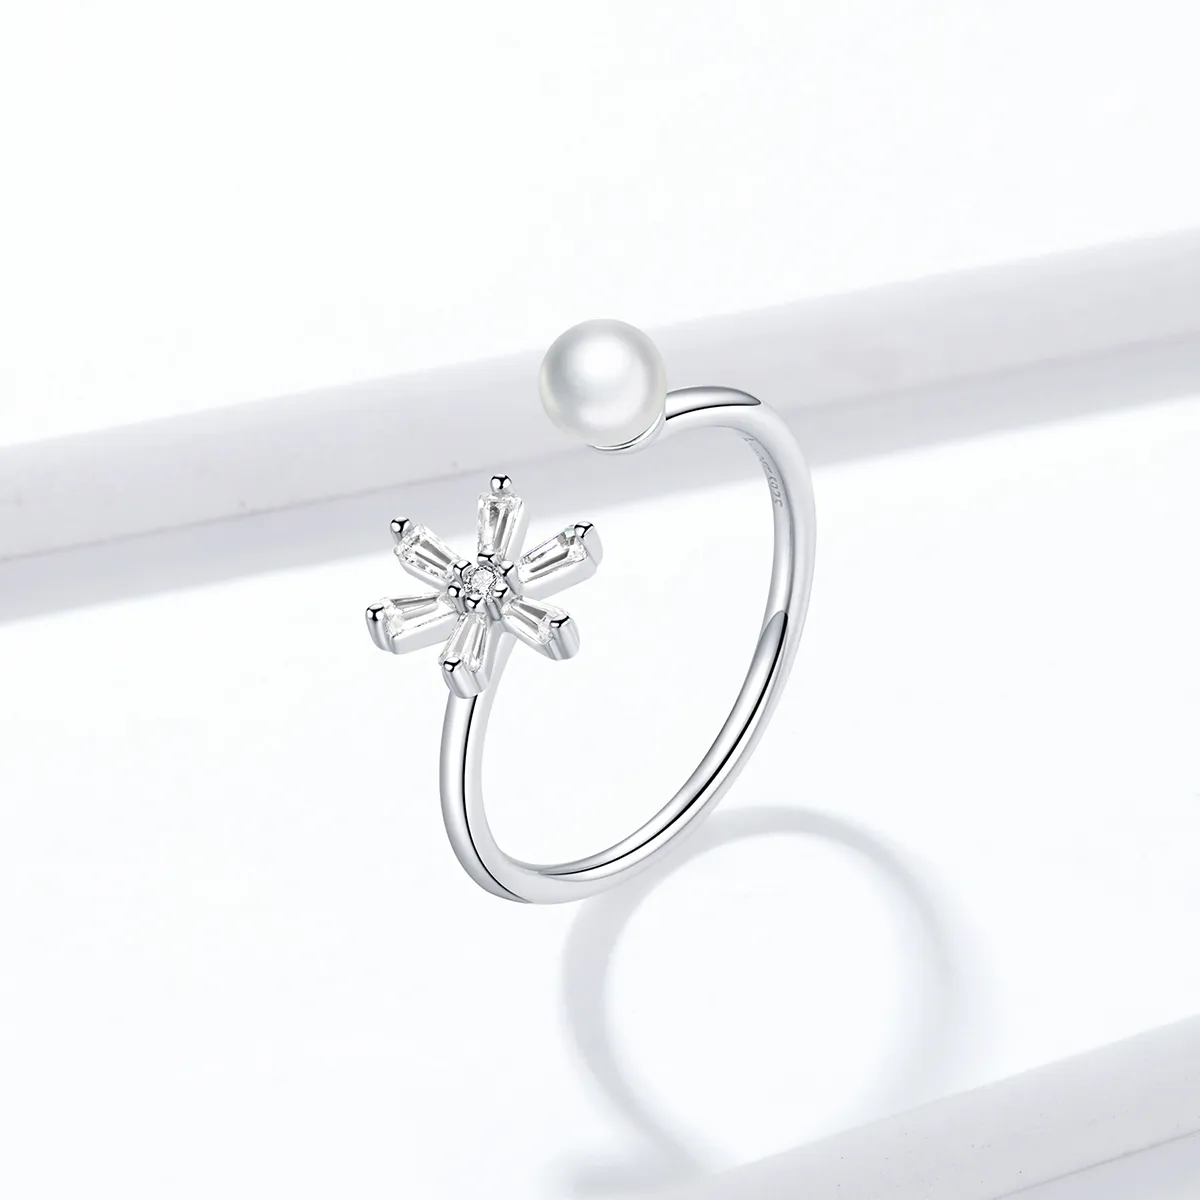 Pandora Style Silver Crystal snowflakes Open Ring - BSR142